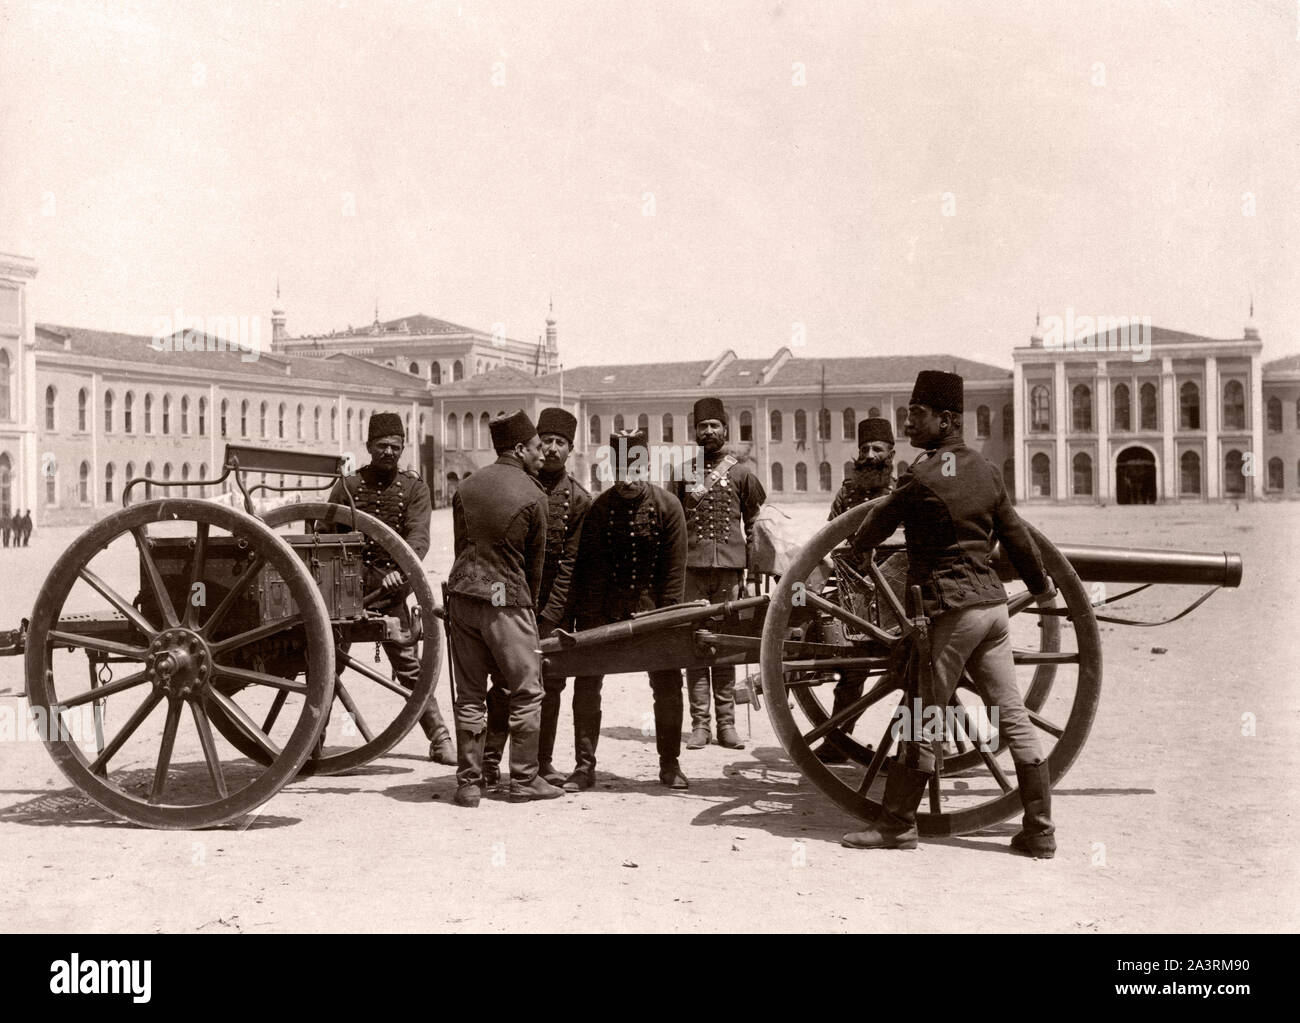 Turkish horse artillery in front of barracks. Horse artillery was a type of light, fast-moving, and fast-firing artillery which provided highly mobile Stock Photo